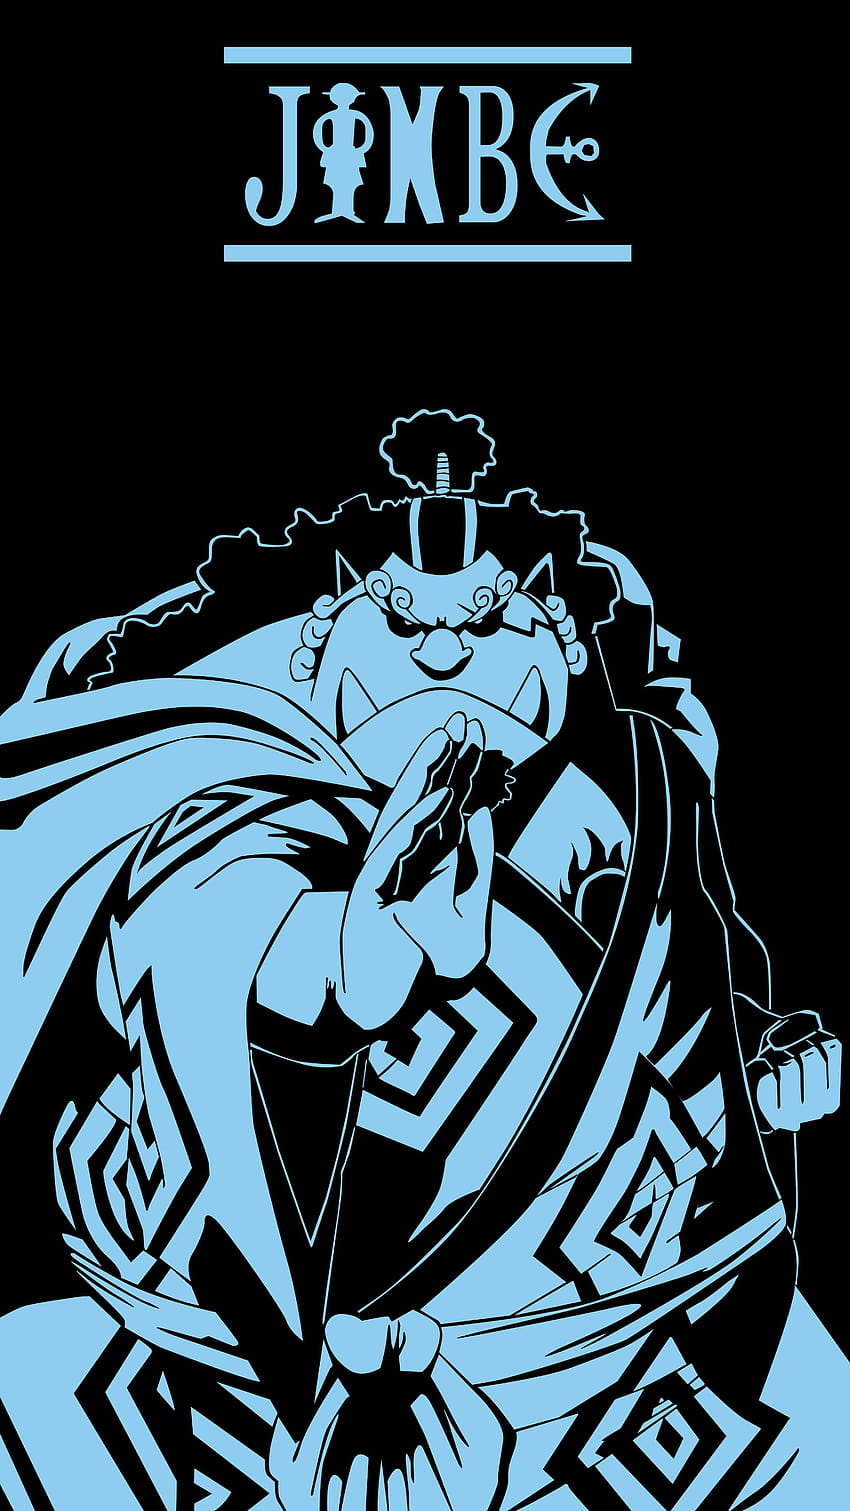 And here we have the last Strawhat, jinbei HD phone wallpaper